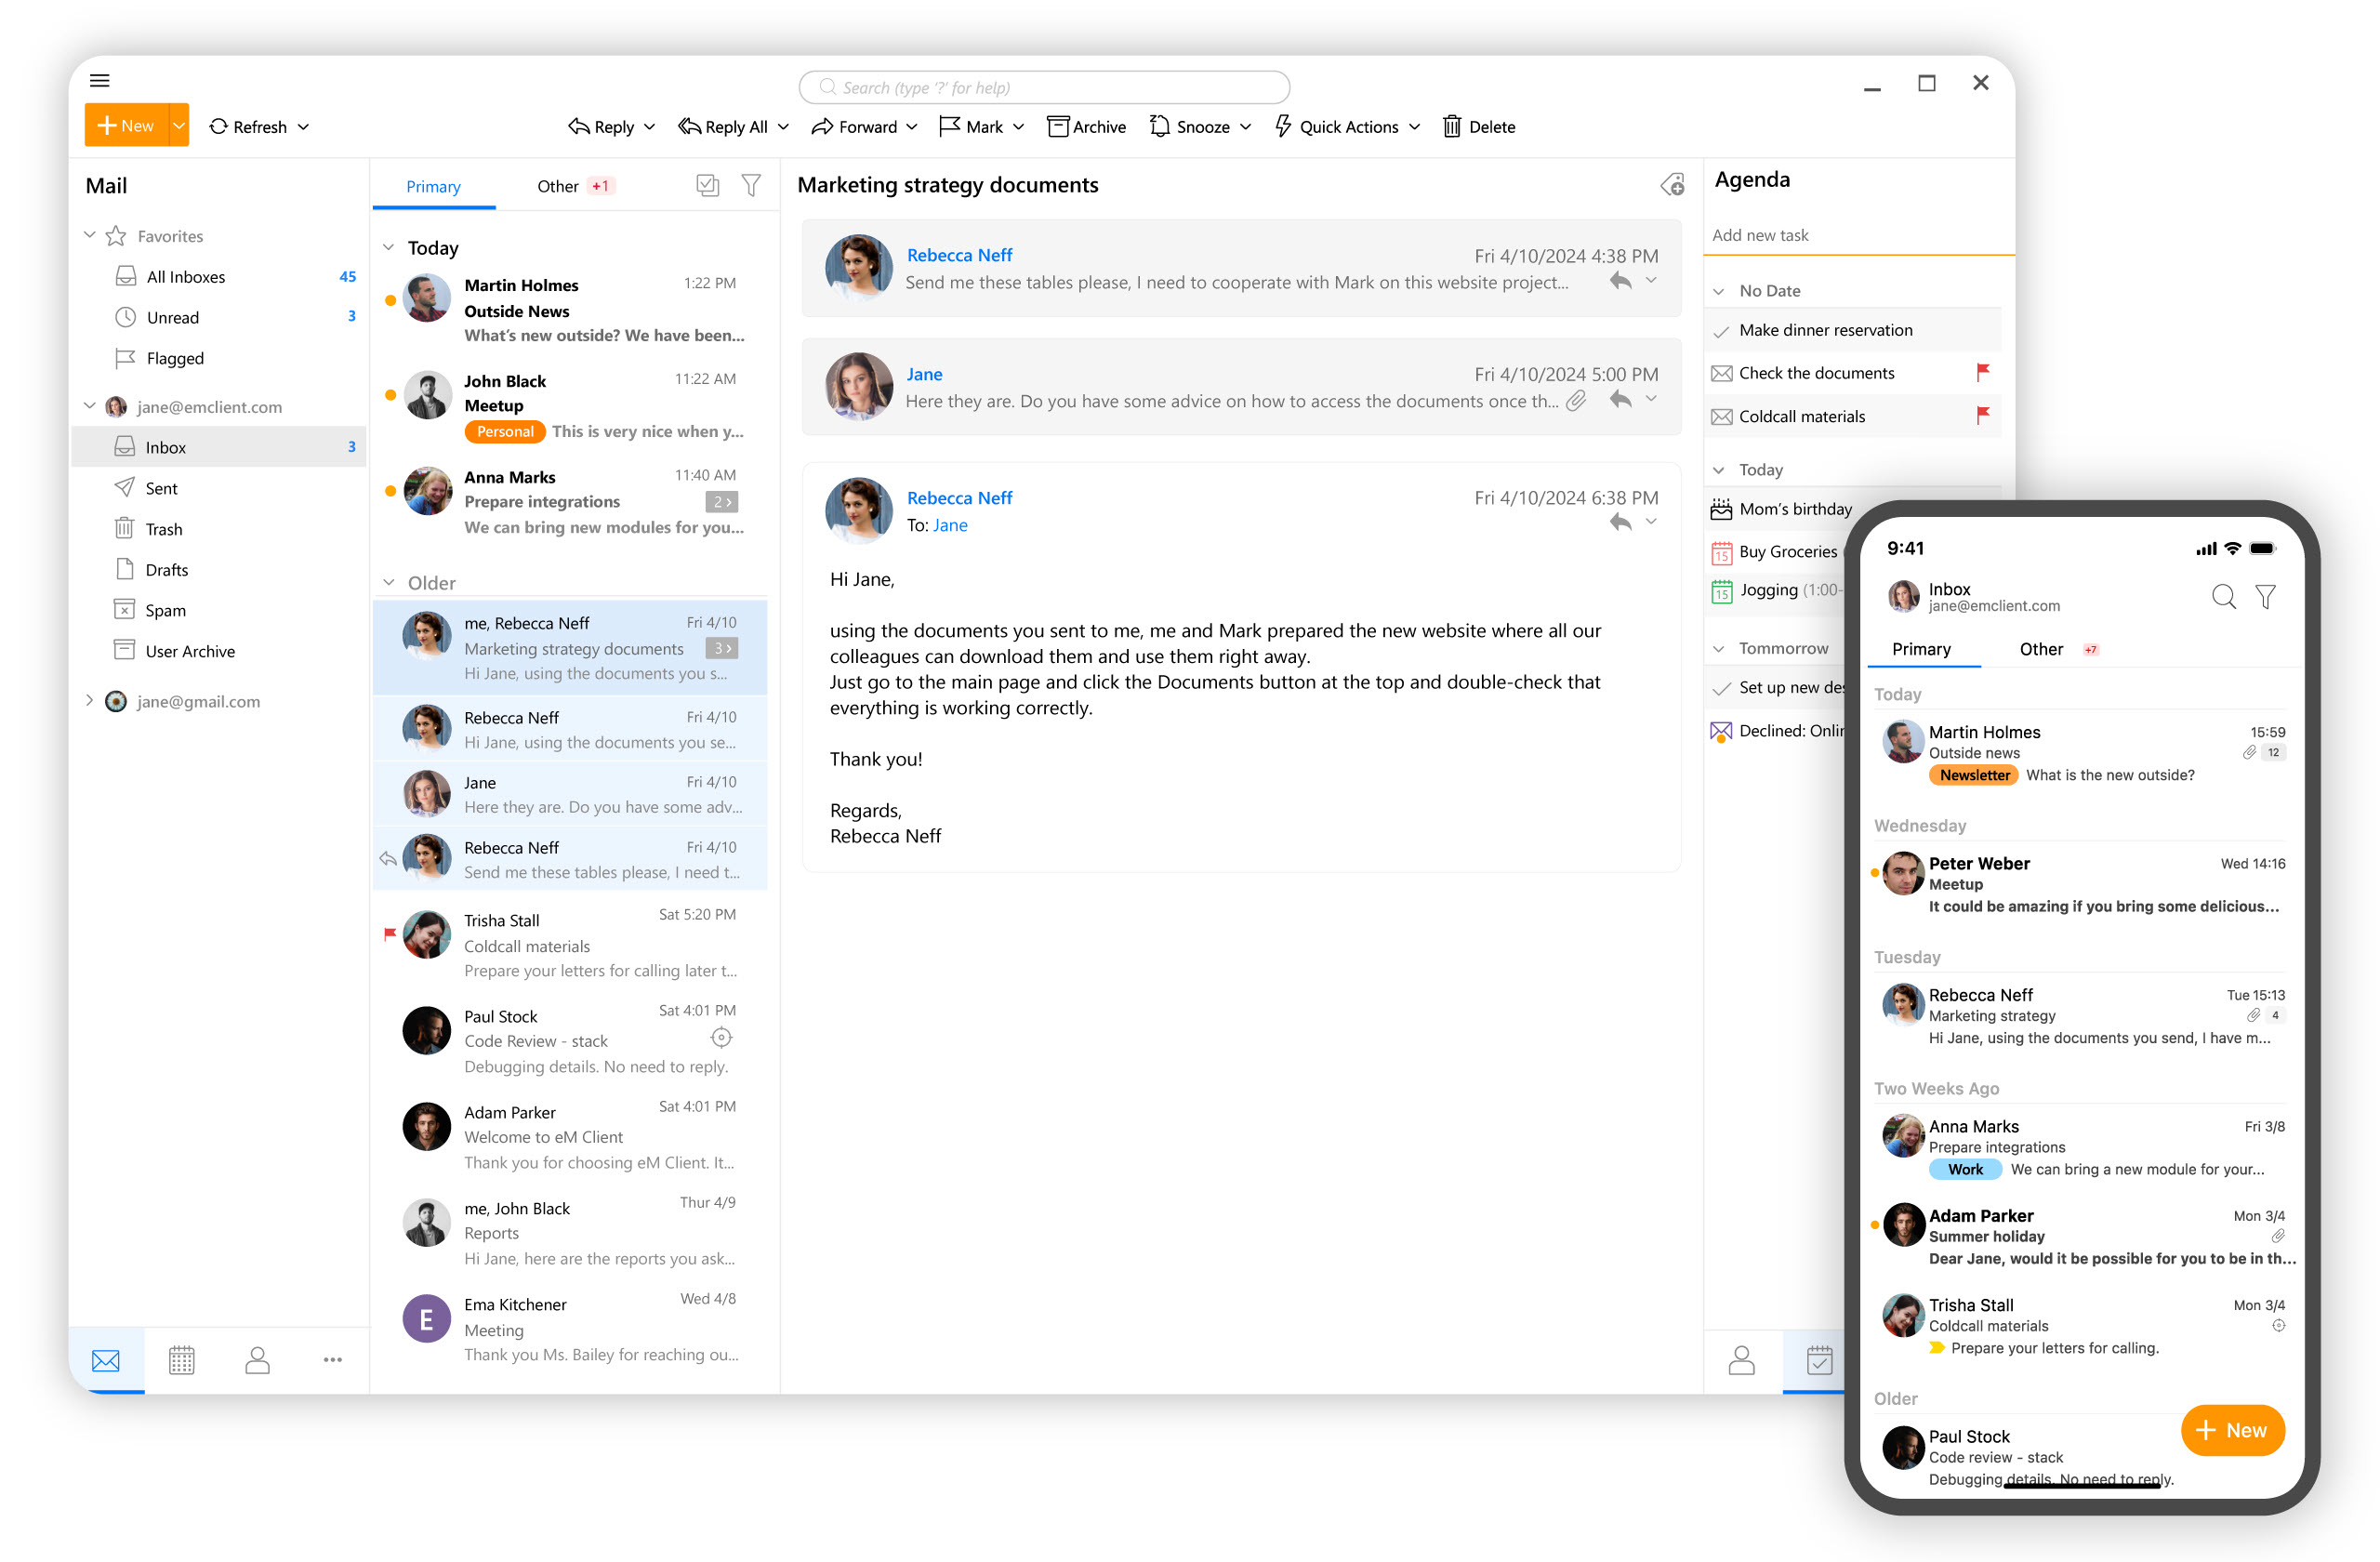  eM Client email app launches groundbreaking version 10 with AI support 